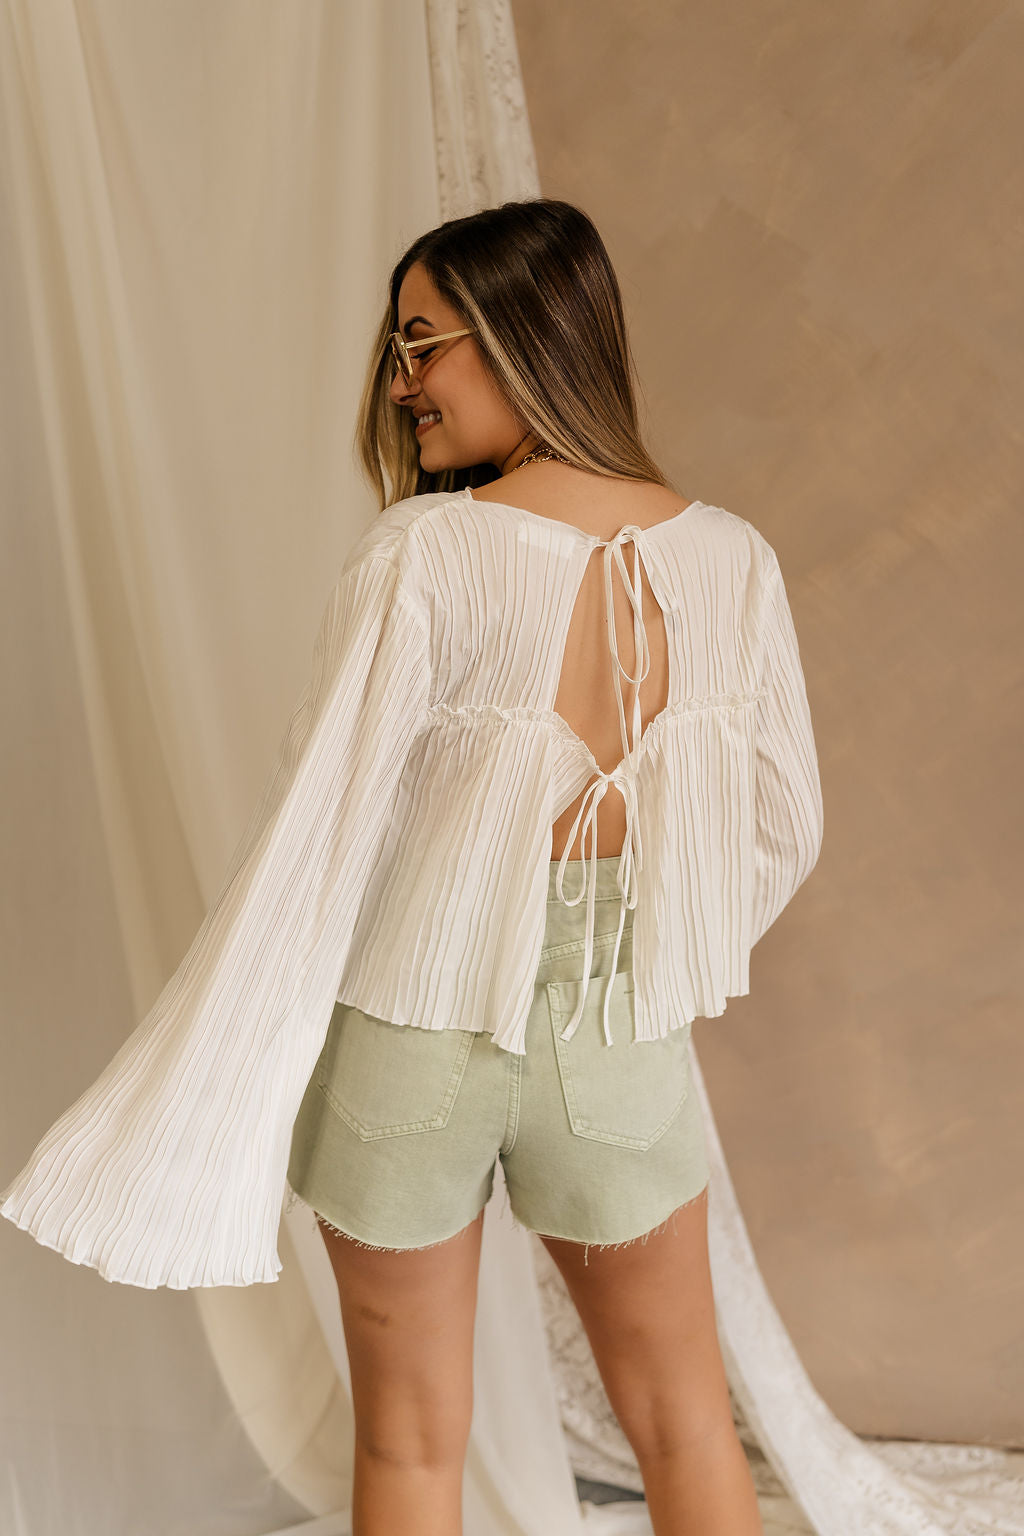 Back view of female model wearing the Kimberly Cream Pleated Long Sleeve Top which features Cream Sheer Plisse Fabric, Cropped Waist, Lettuce Hem Details, Round Neckline and Open Back with Tie Closures